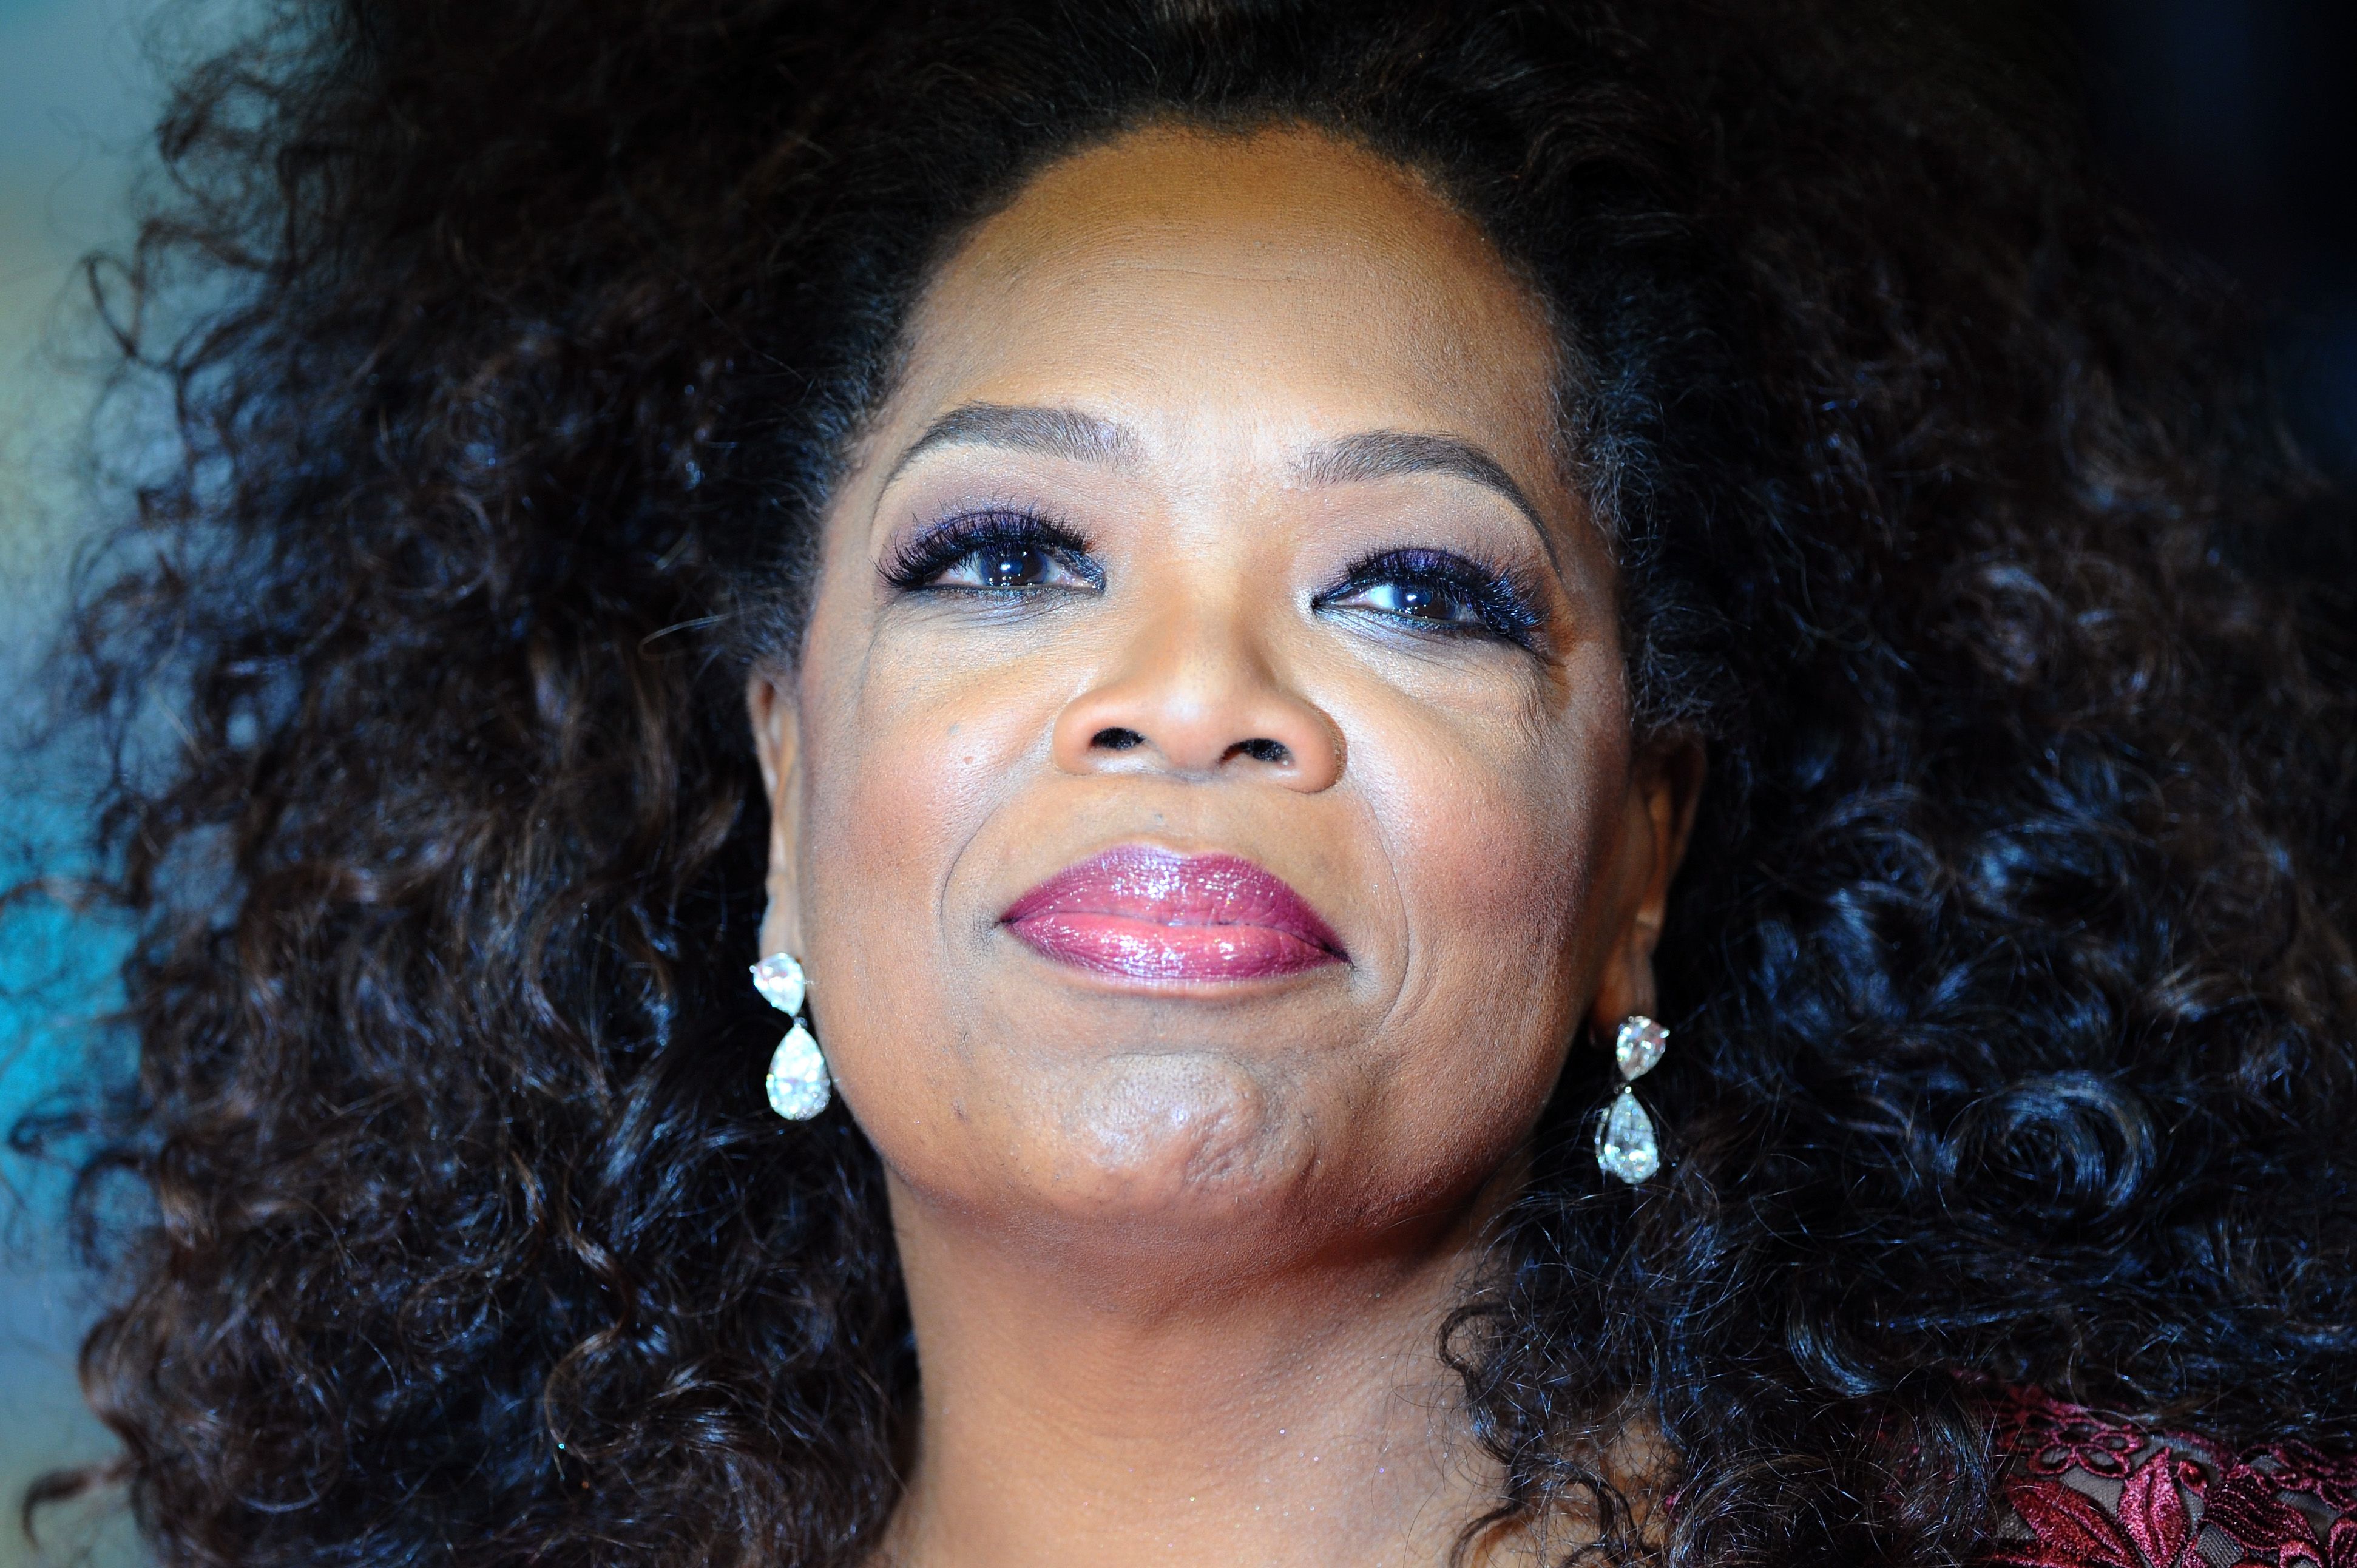  Oprah Winfrey at the EE British Academy Film Awards in 2014 in London | Source: Getty Images